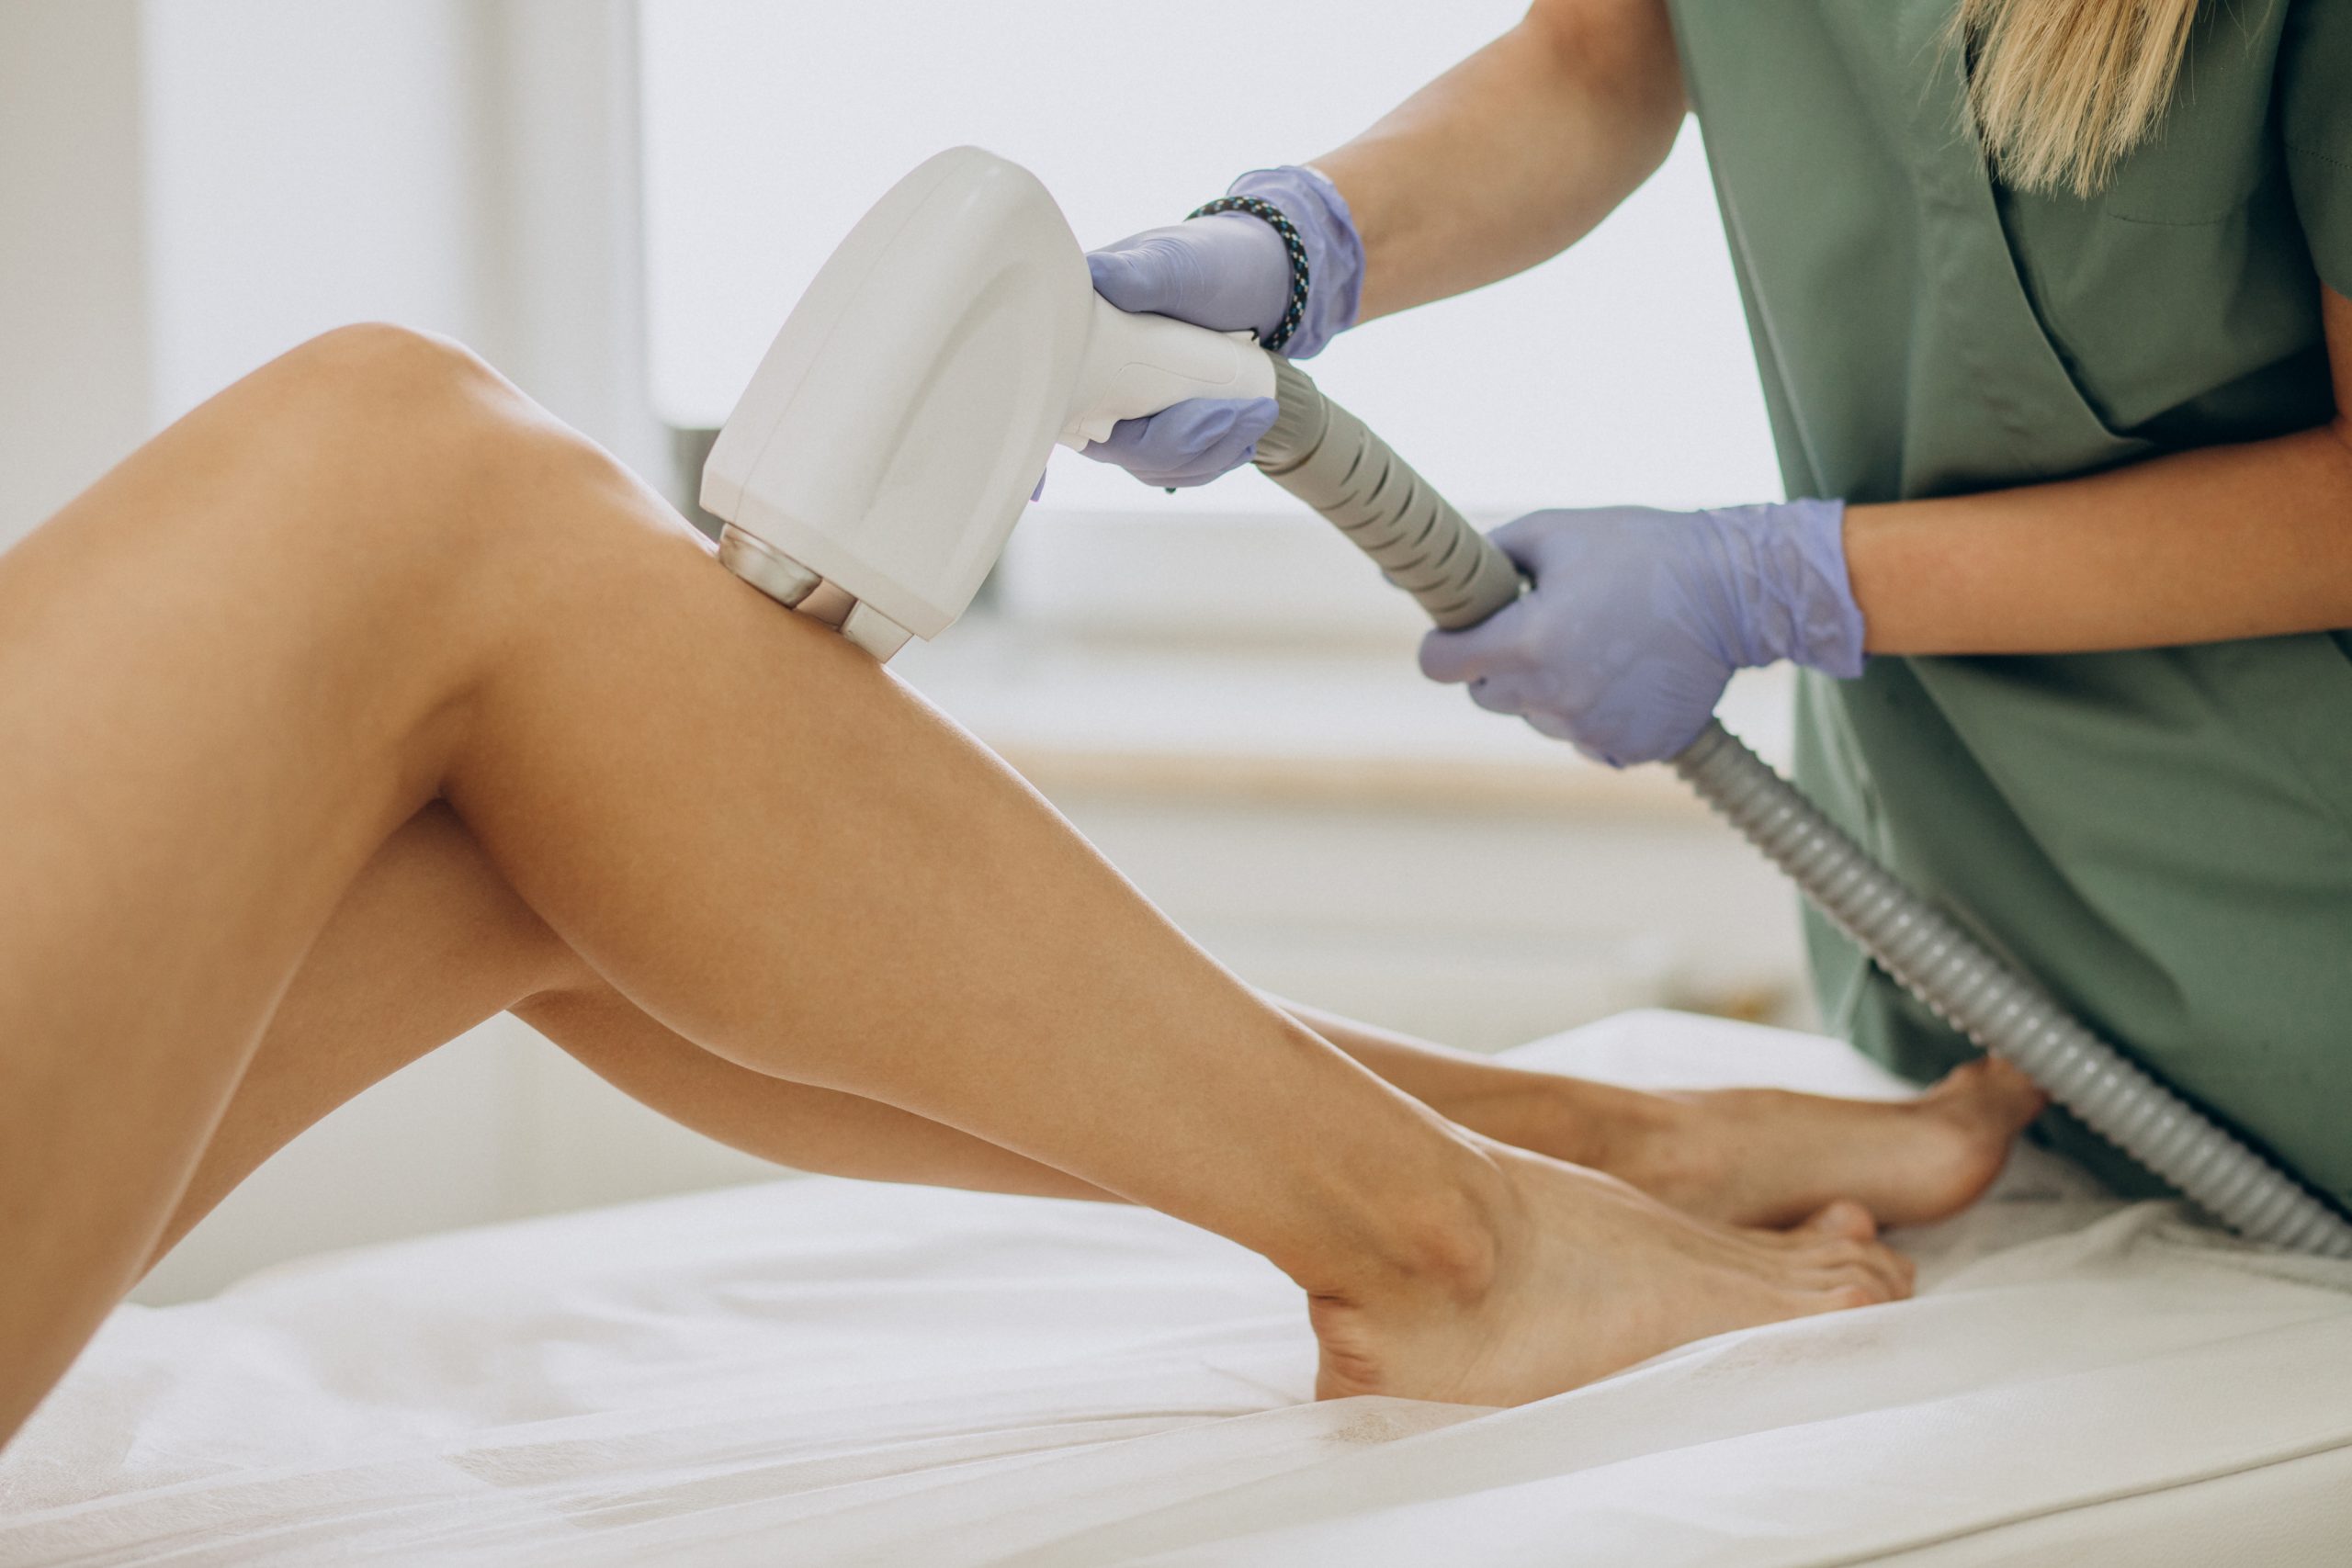 5 Laser Hair Removal Facts You Probably Didn’t Know